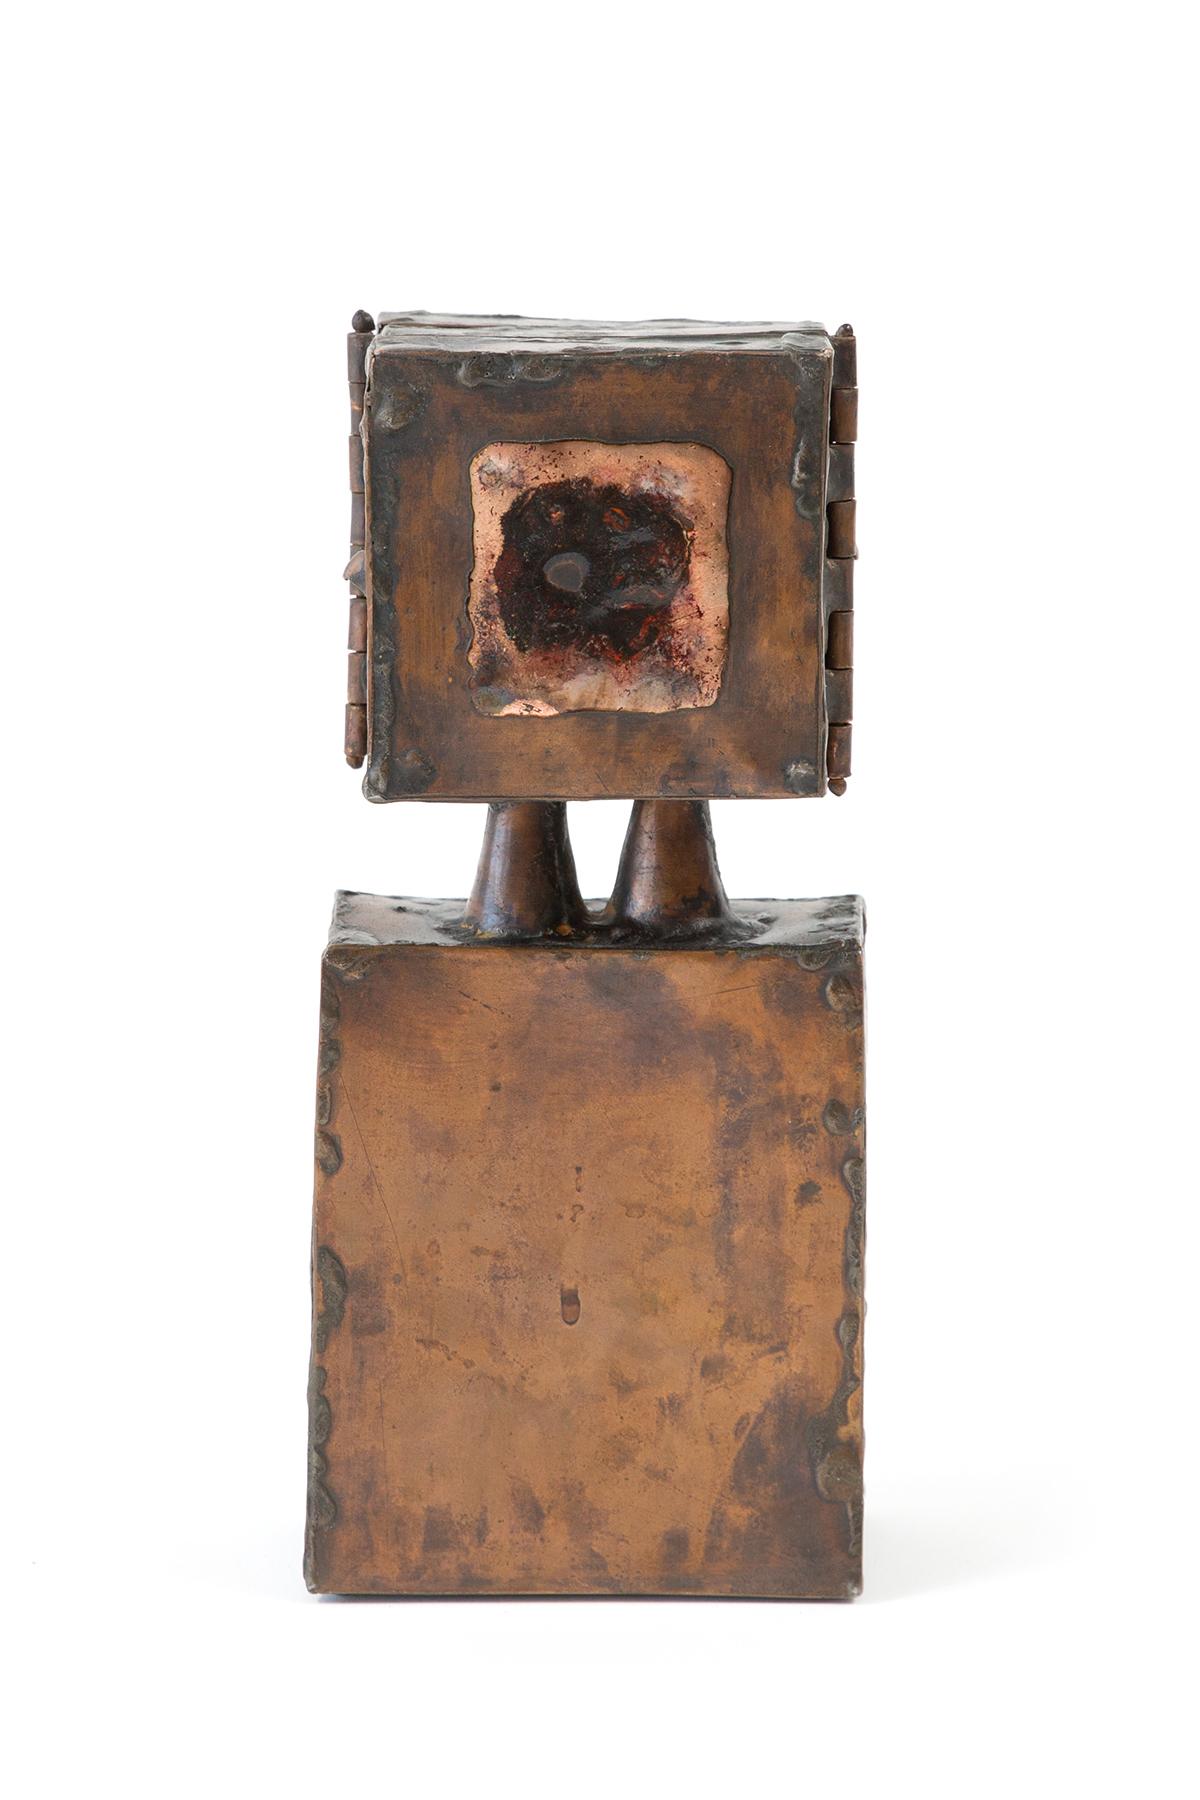 Copper and enamel sculpture with a signature by artist David Laughlin features a hinged top portion that reveals a modernist face, a circular abstracted cut-out and an open circle in the centre when both sides are opened. The hinged doors, when